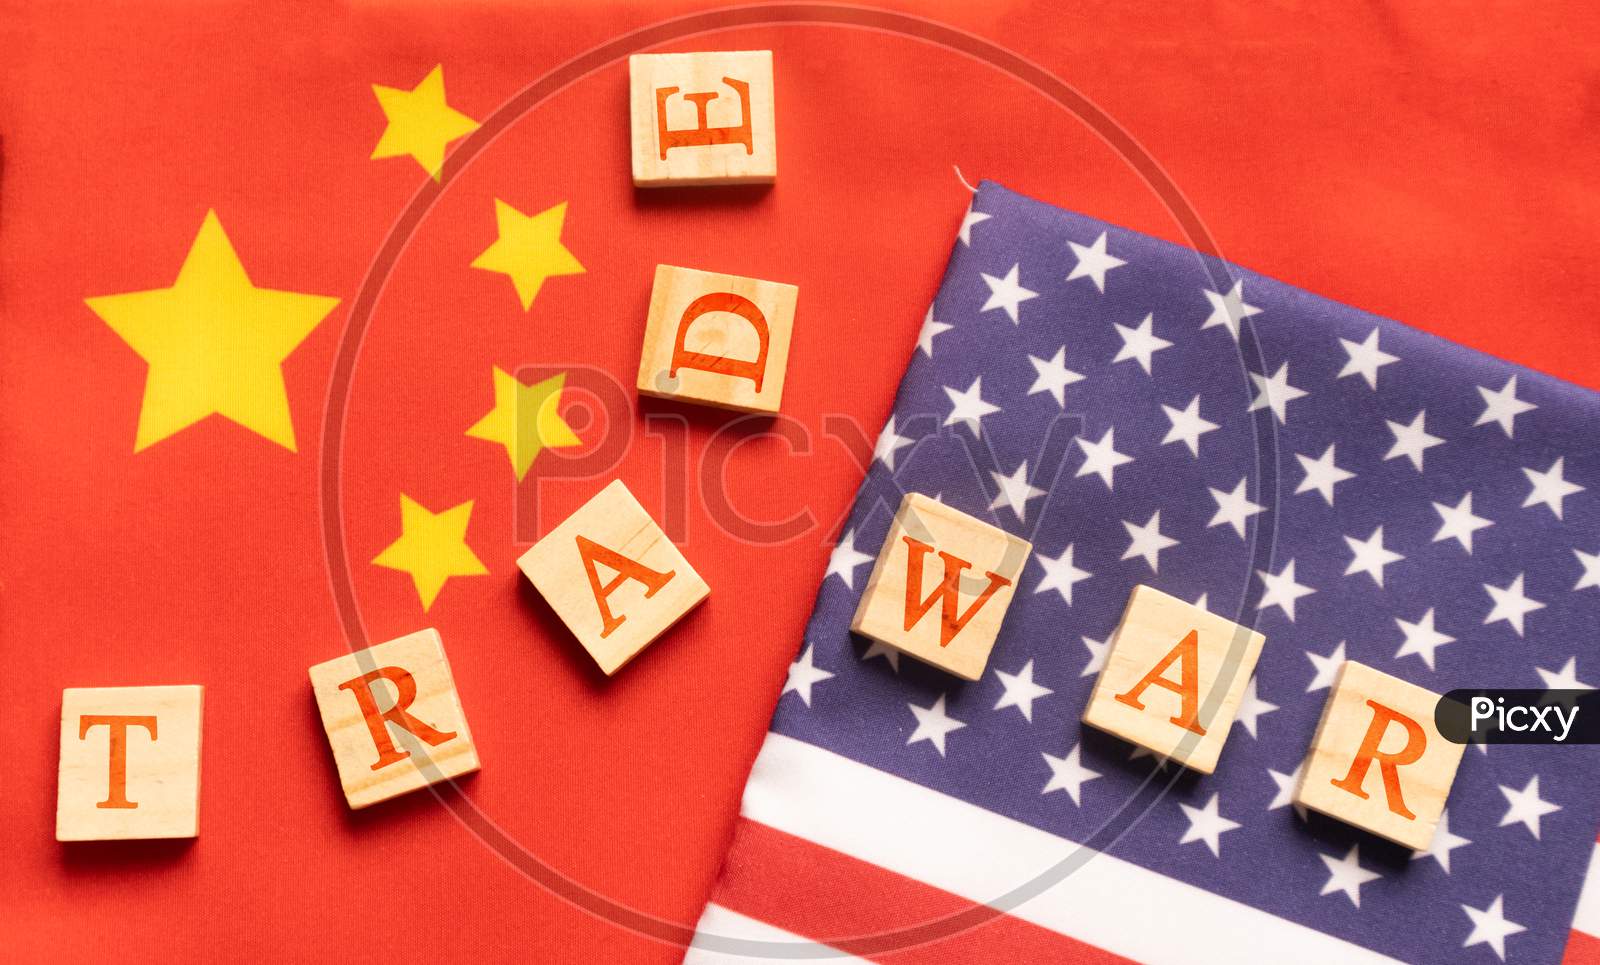 China-Us Trade War Concept - Flag Of China And The United States With Wooden Block Letters